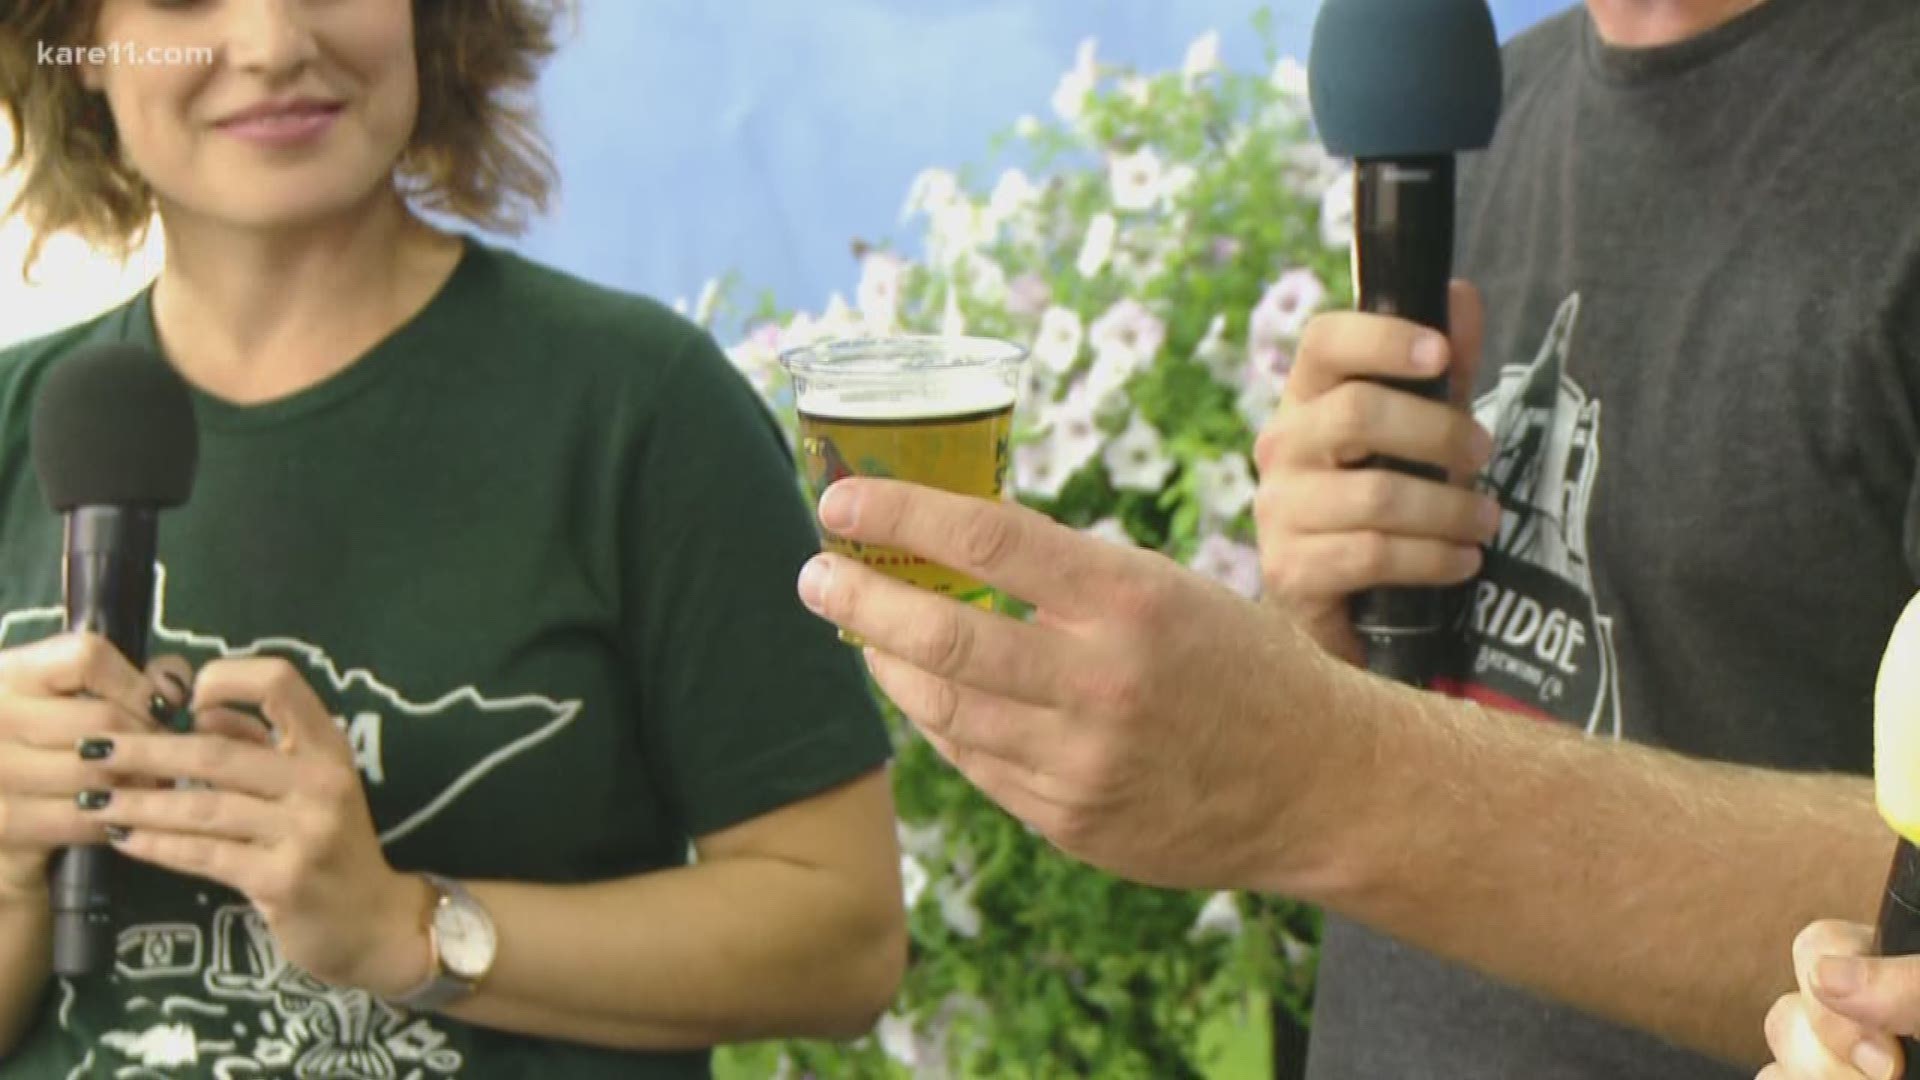 The Minnesota State Fair's "Brewed in Minnesota" exhibit showcases the Land of 10,000 Beers.